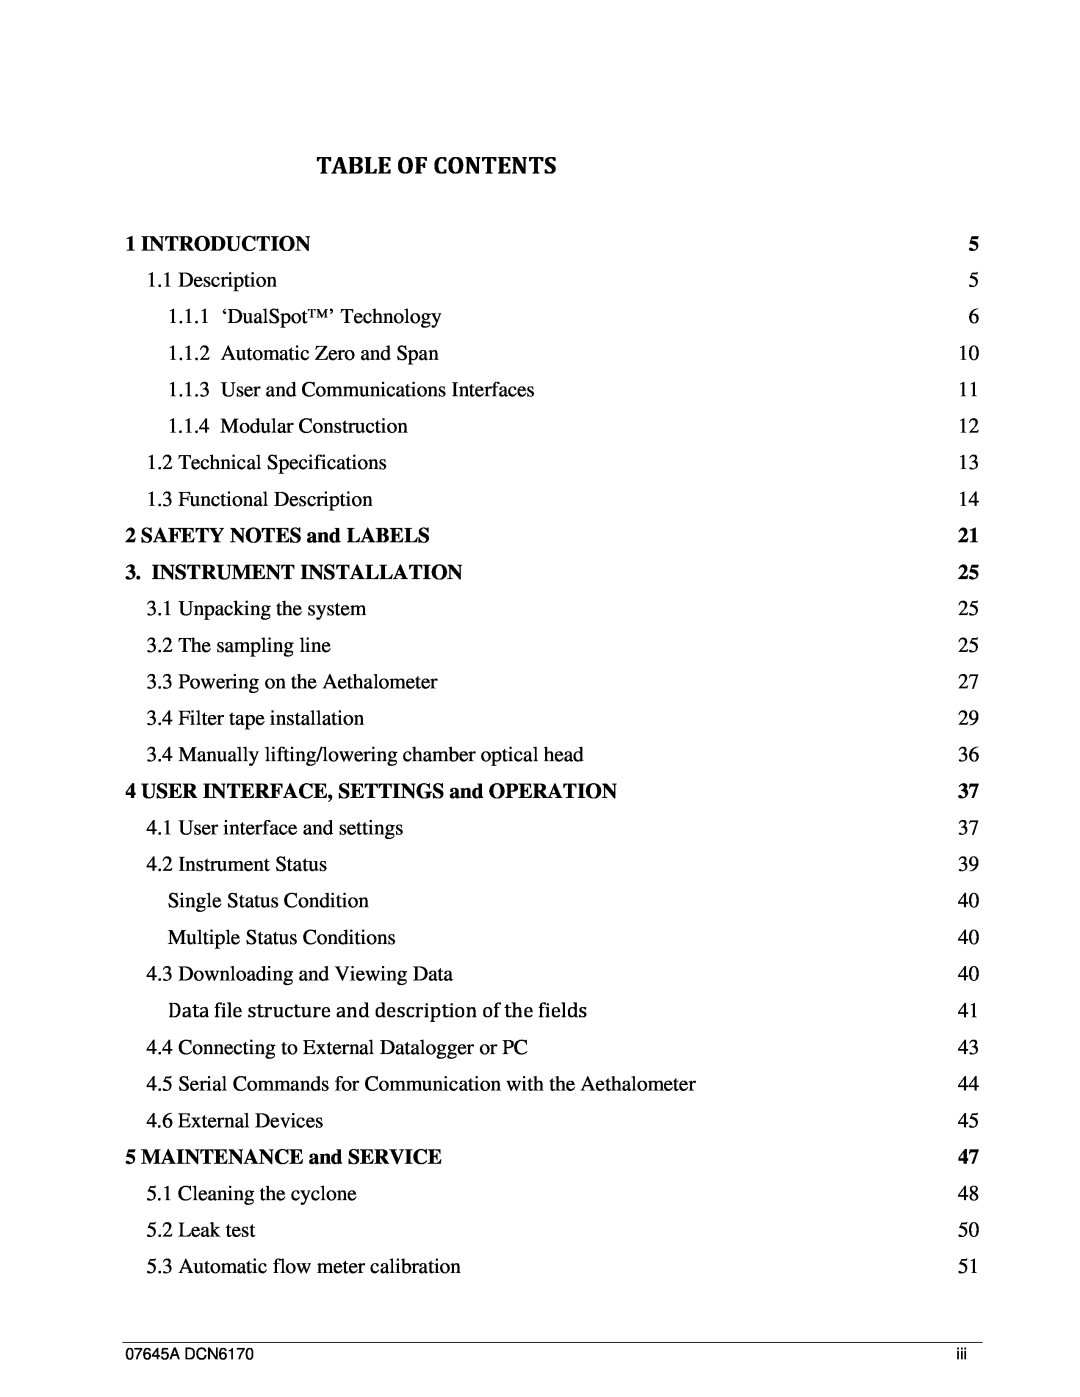 Teledyne 633 user manual Table Of Contents 